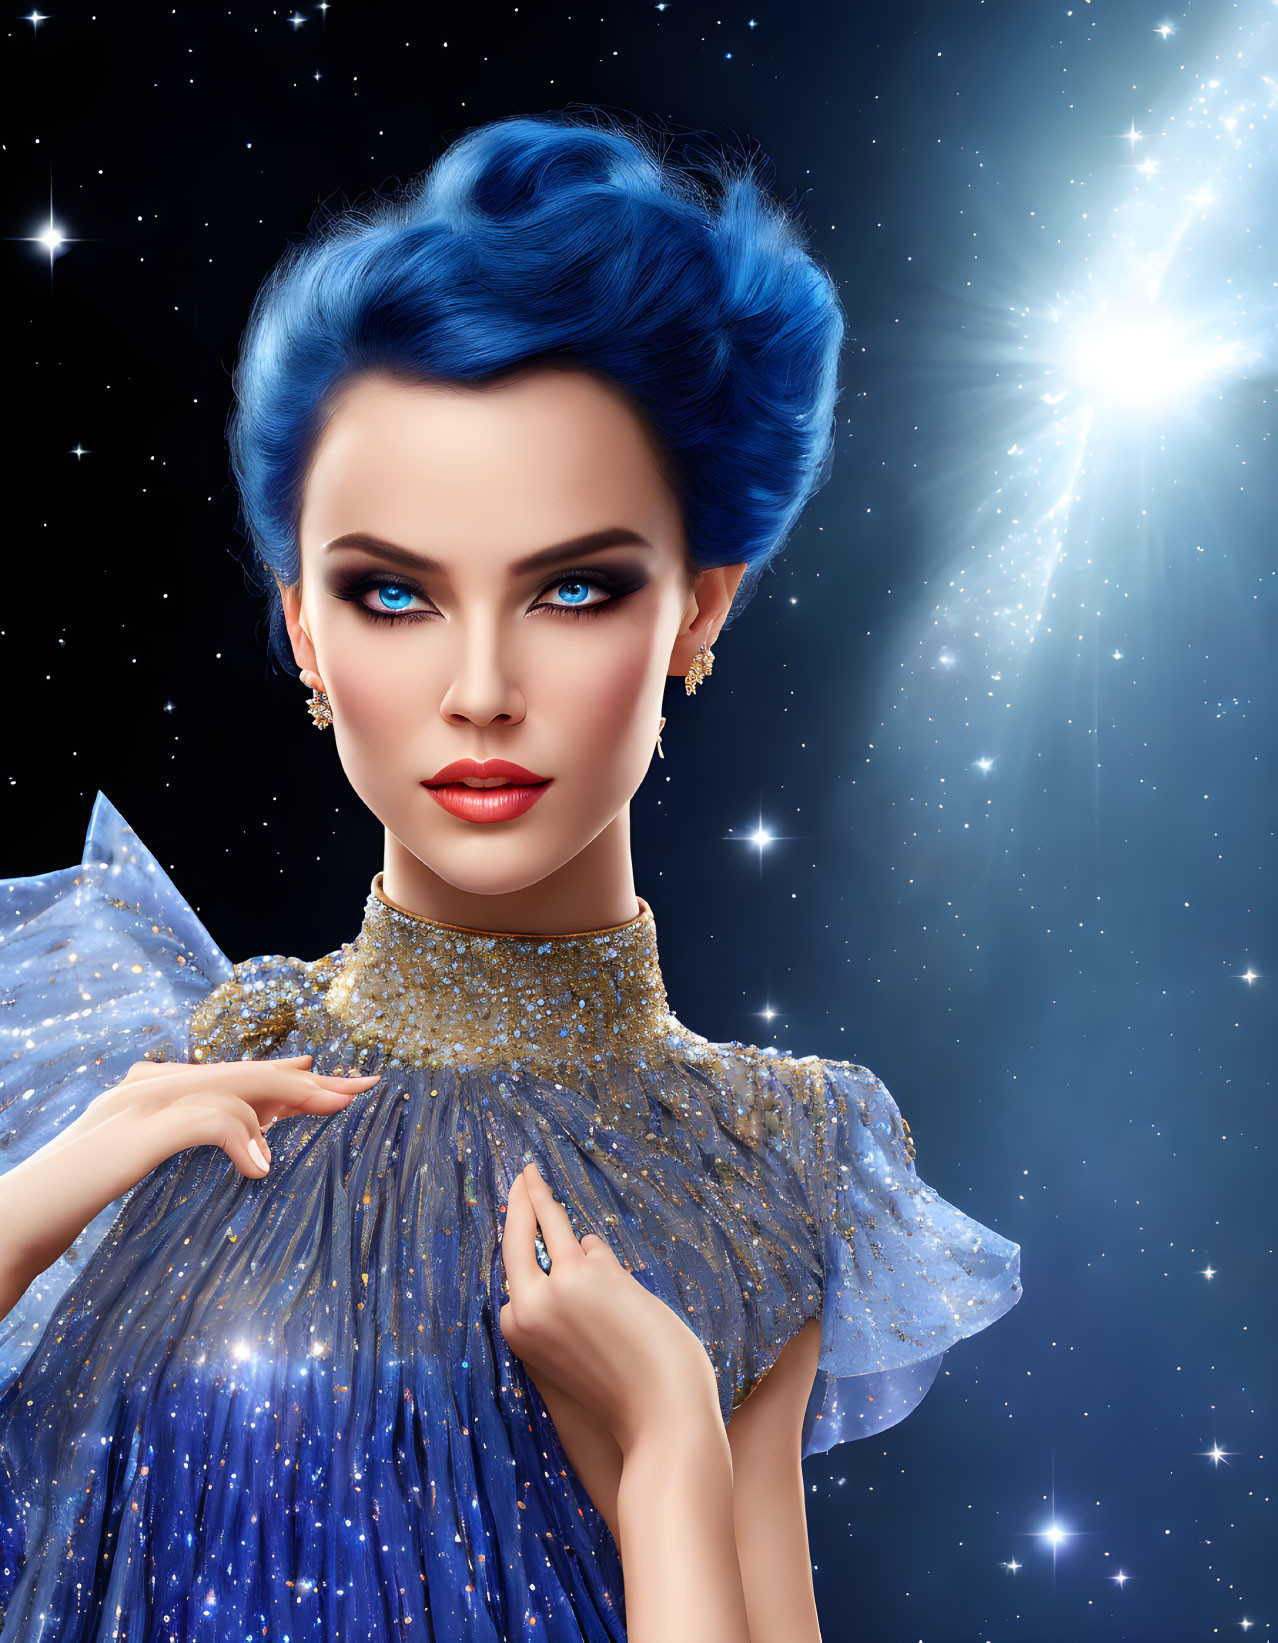 Digital Artwork: Woman with Blue Hair and Gold Dress on Starry Background